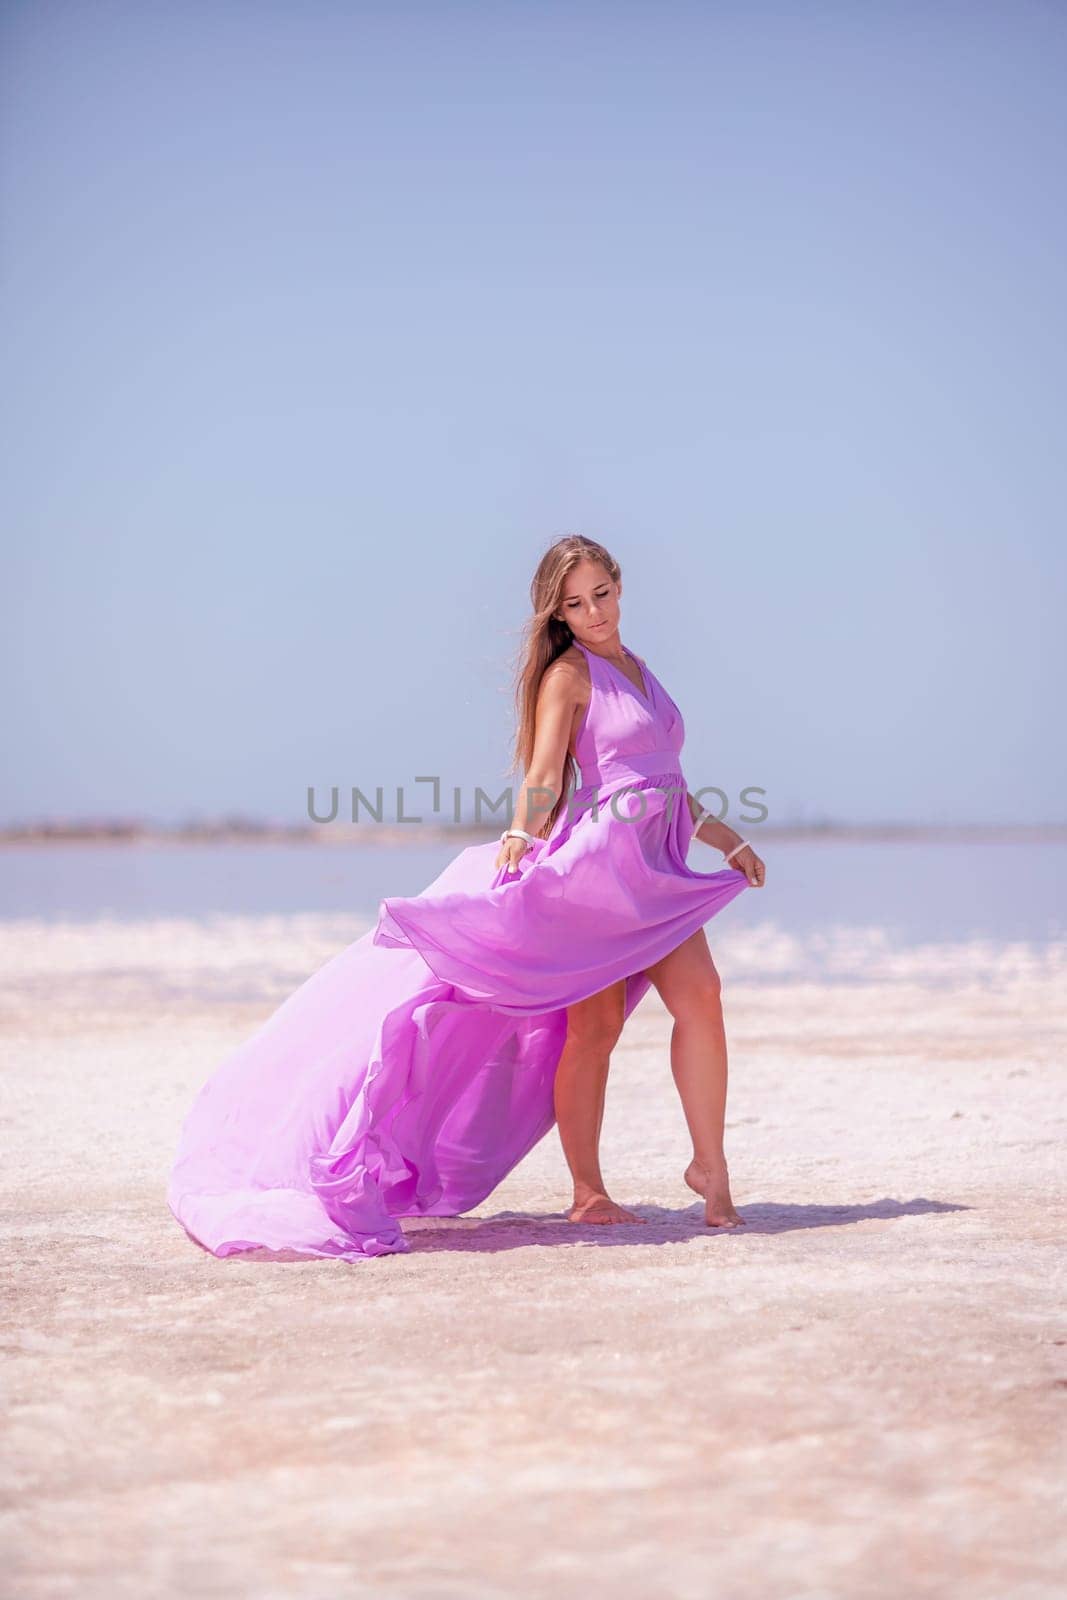 Woman pink salt lake. Against the backdrop of a pink salt lake, a woman in a long pink dress takes a leisurely stroll along the white, salty shore, capturing a wanderlust moment. by Matiunina